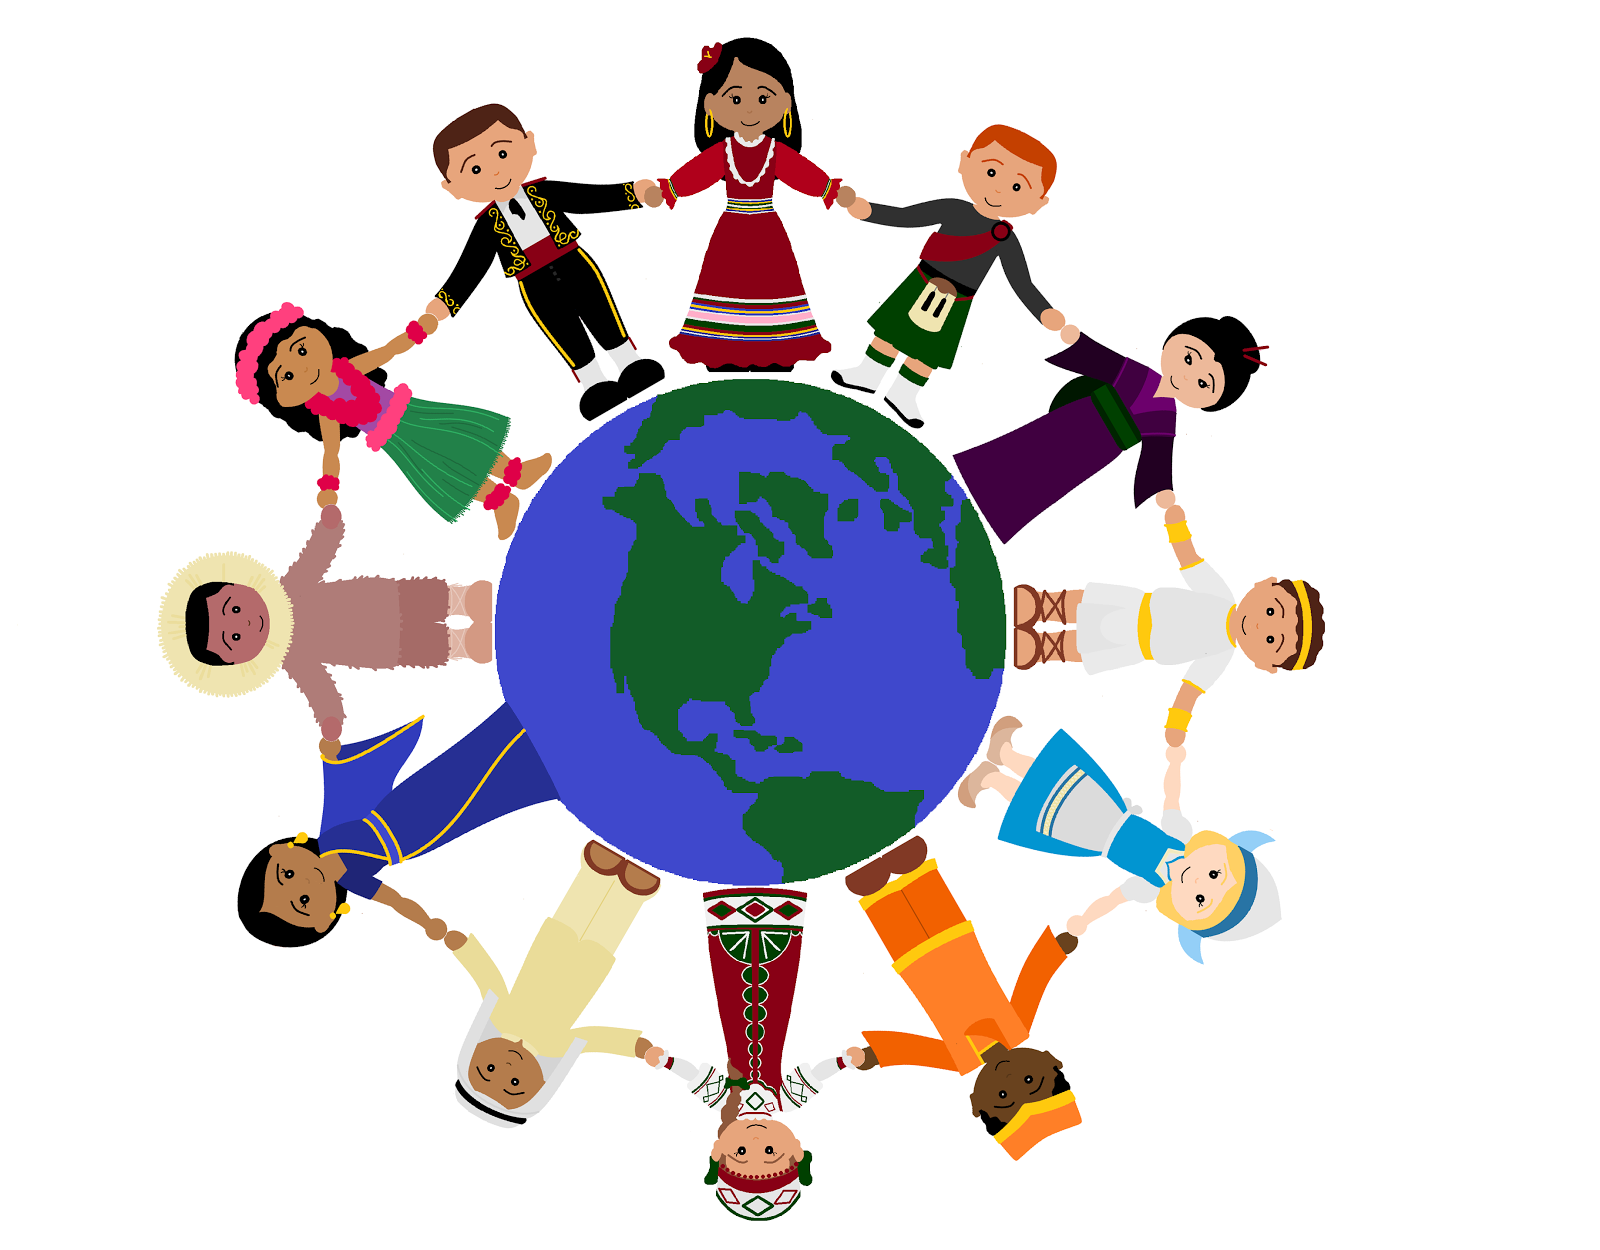 People holding hands around the world clipart - ClipartFox